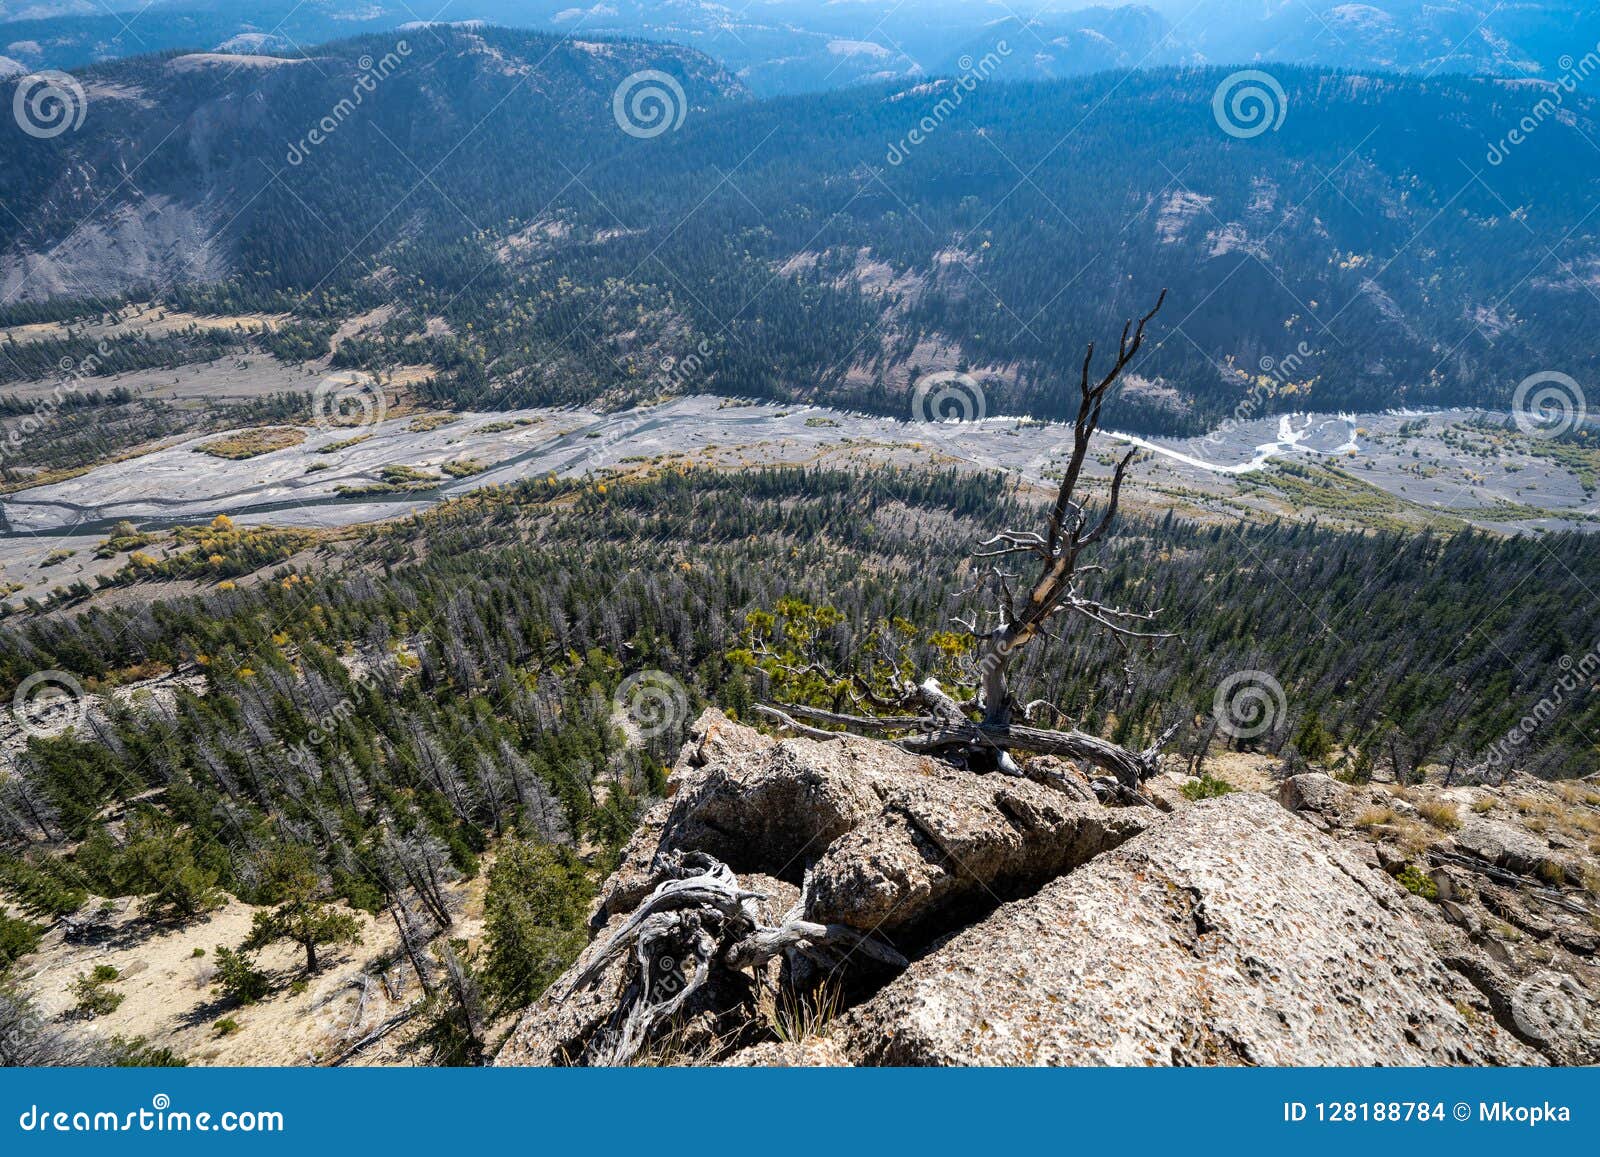 view of a rocky ledge overlooking a valley in the bridger-teton national forest